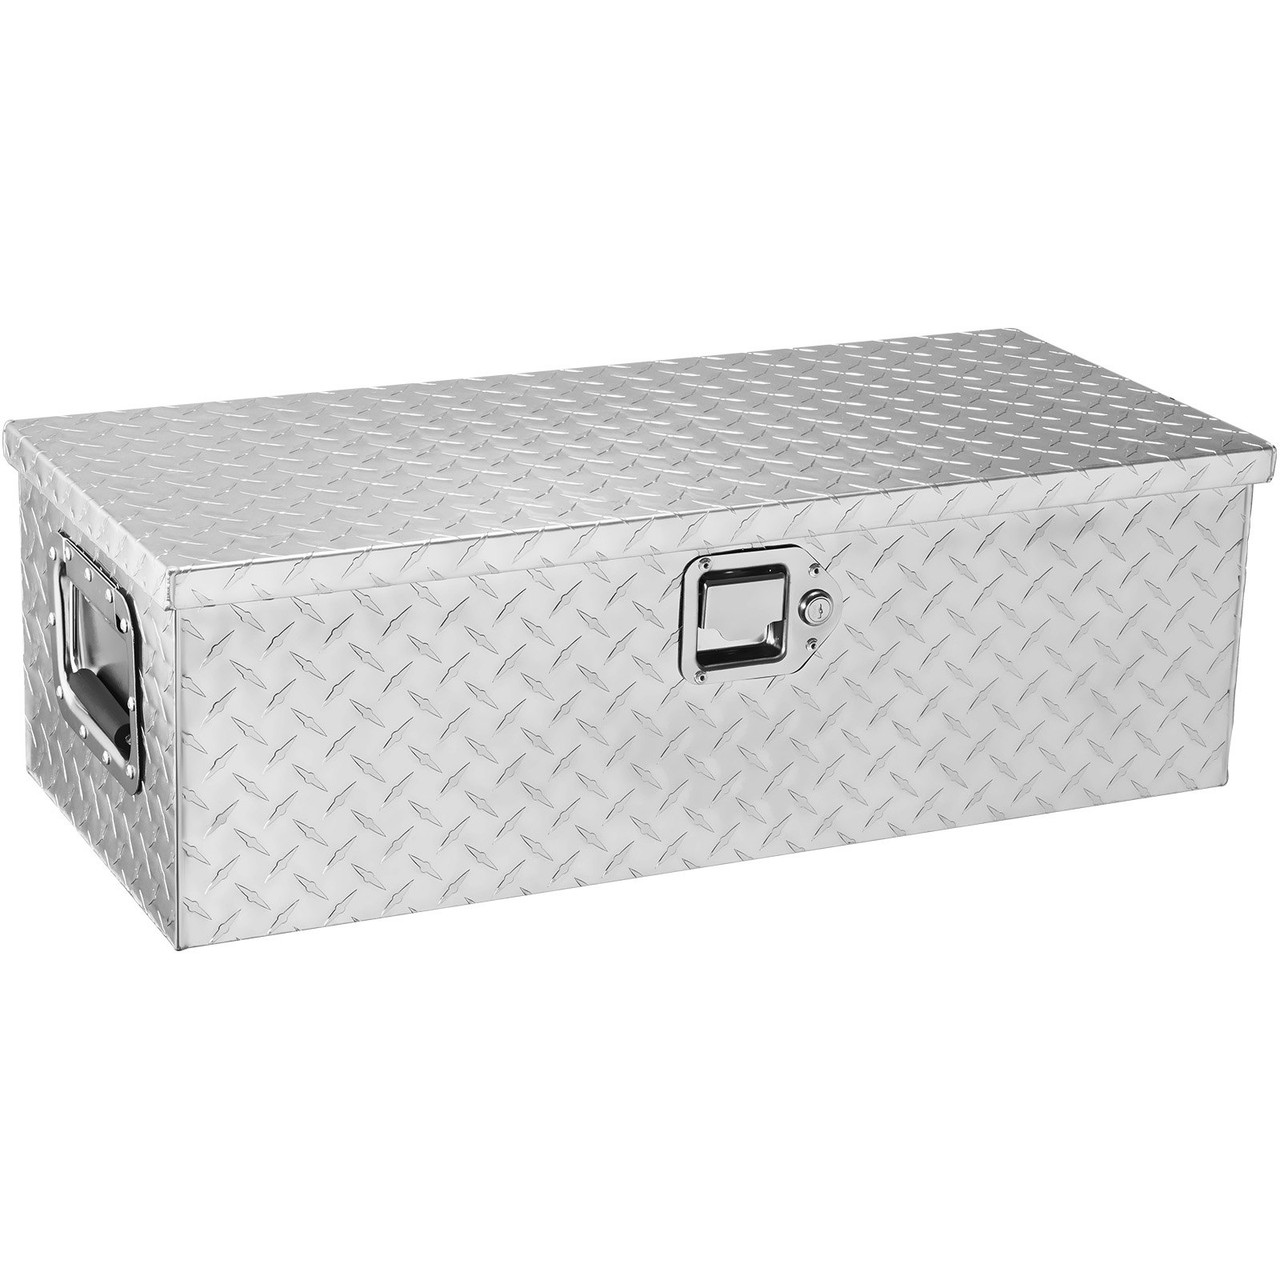 Heavy Duty Aluminum Truck Bed Tool Box, Diamond Plate Tool Box with Side Handle and Lock Keys, Storage Tool Box Chest Box Organizer for Pickup, Truck Bed, RV, Trailer, 30"x13"x9.6", Silver